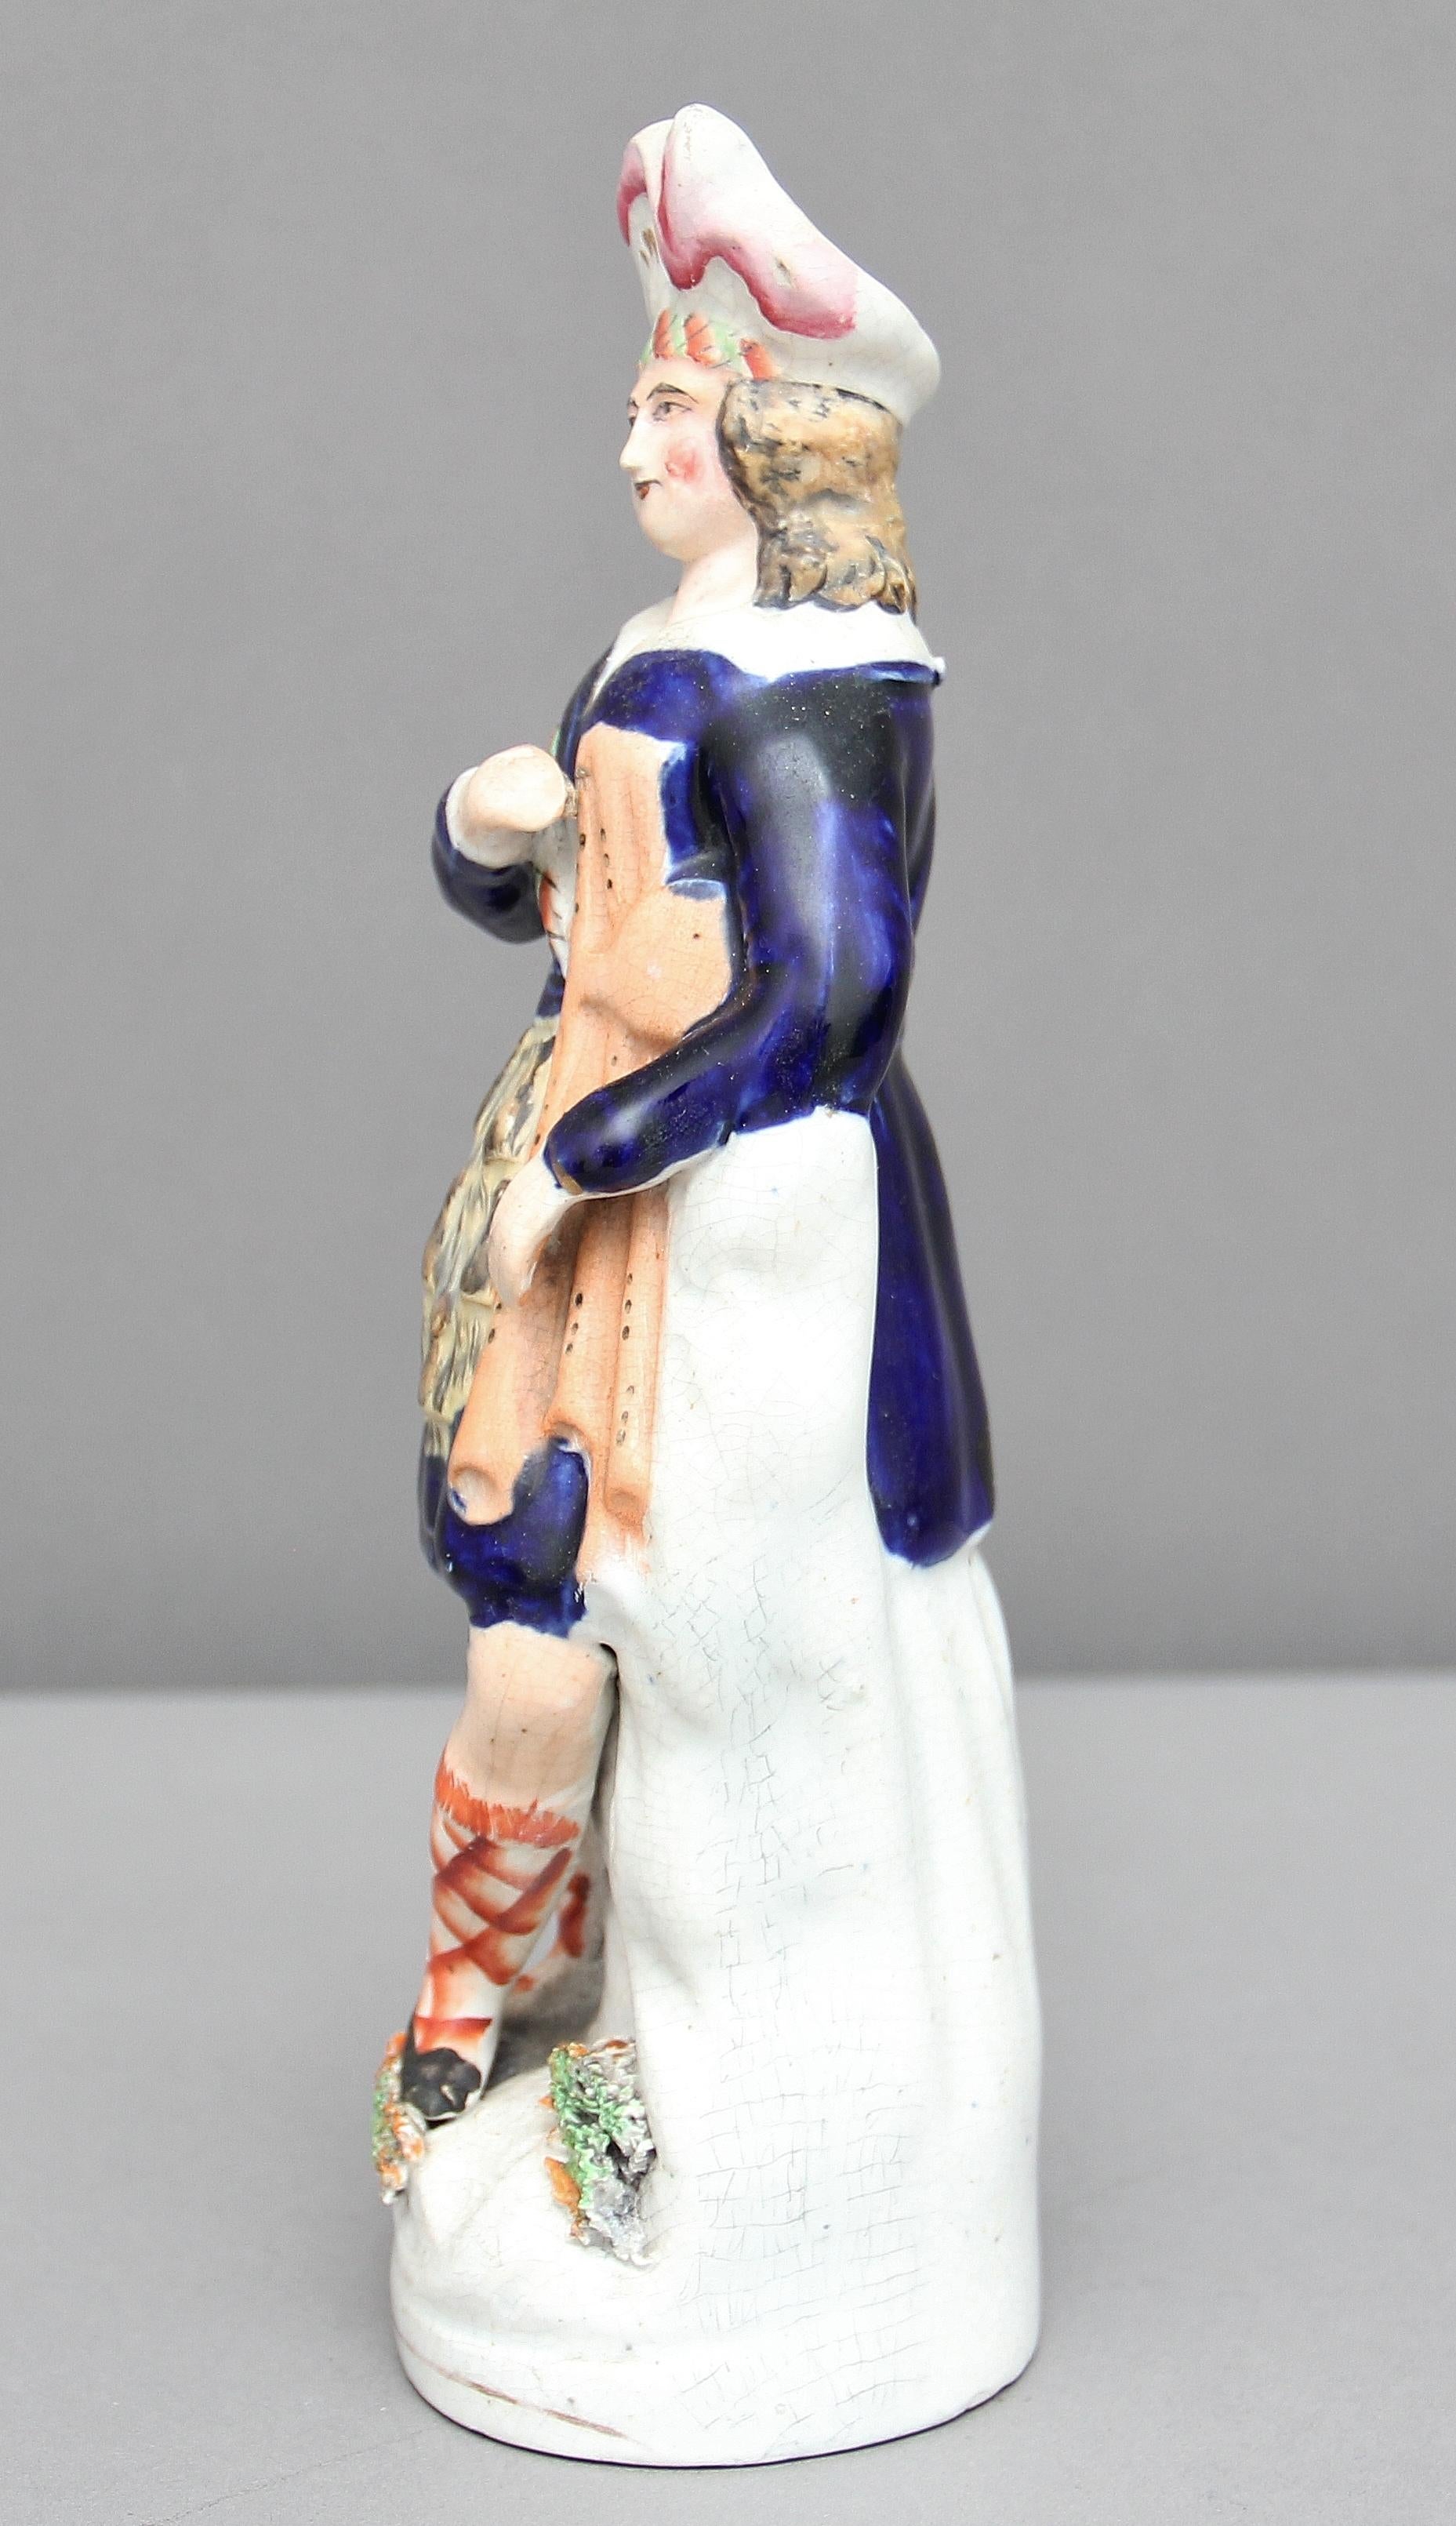 19th century Staffordshire figure of a Scottish piper holding his bagpipes. God color and condition, circa 1850.